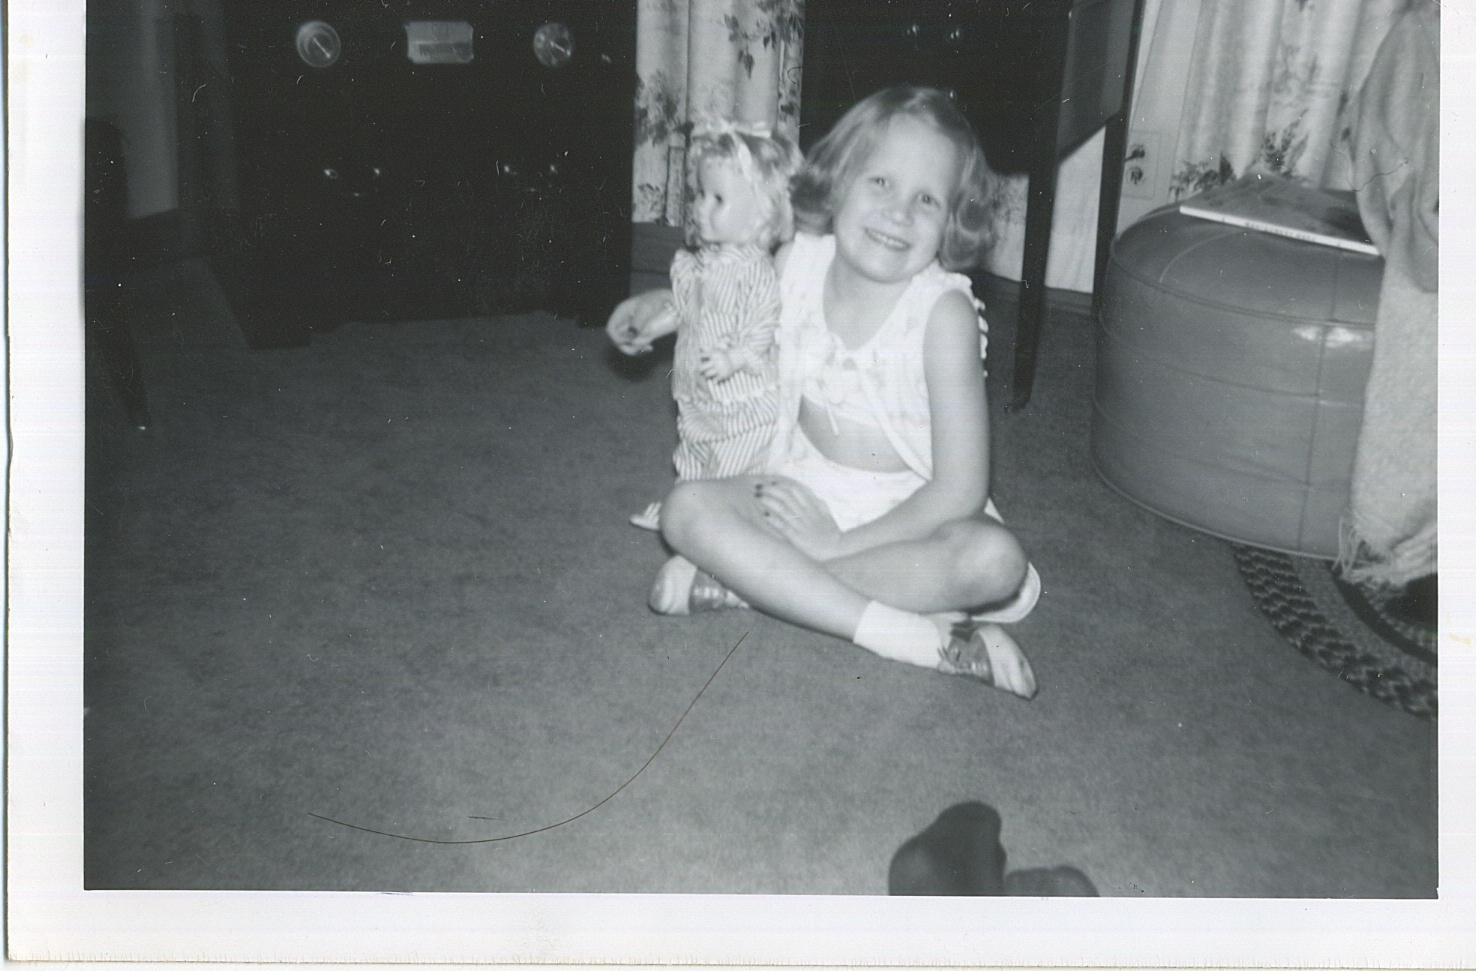 Connie with her Chatty Cathy doll